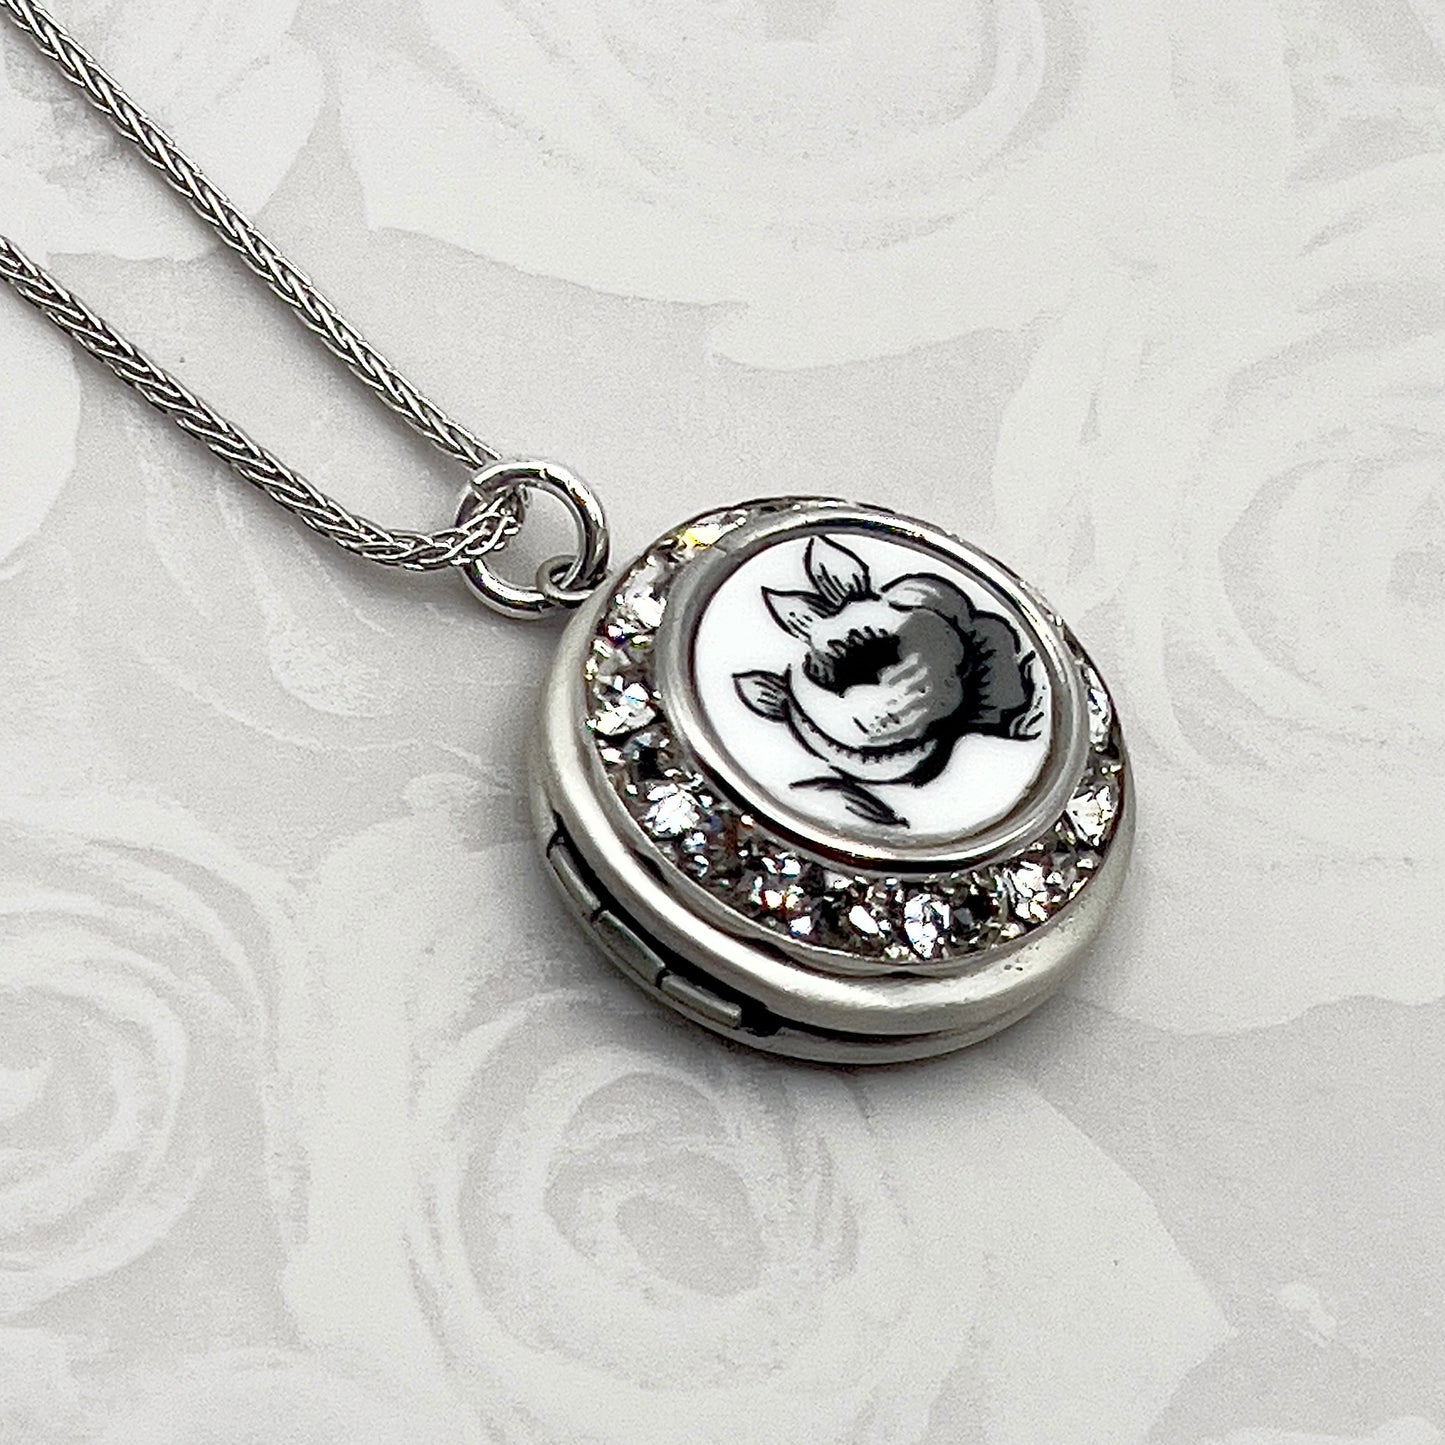 Black Rose Photo Locket Necklace Gift for Girlfriend, Anniversary Gifts for Her, Broken China Jewelry